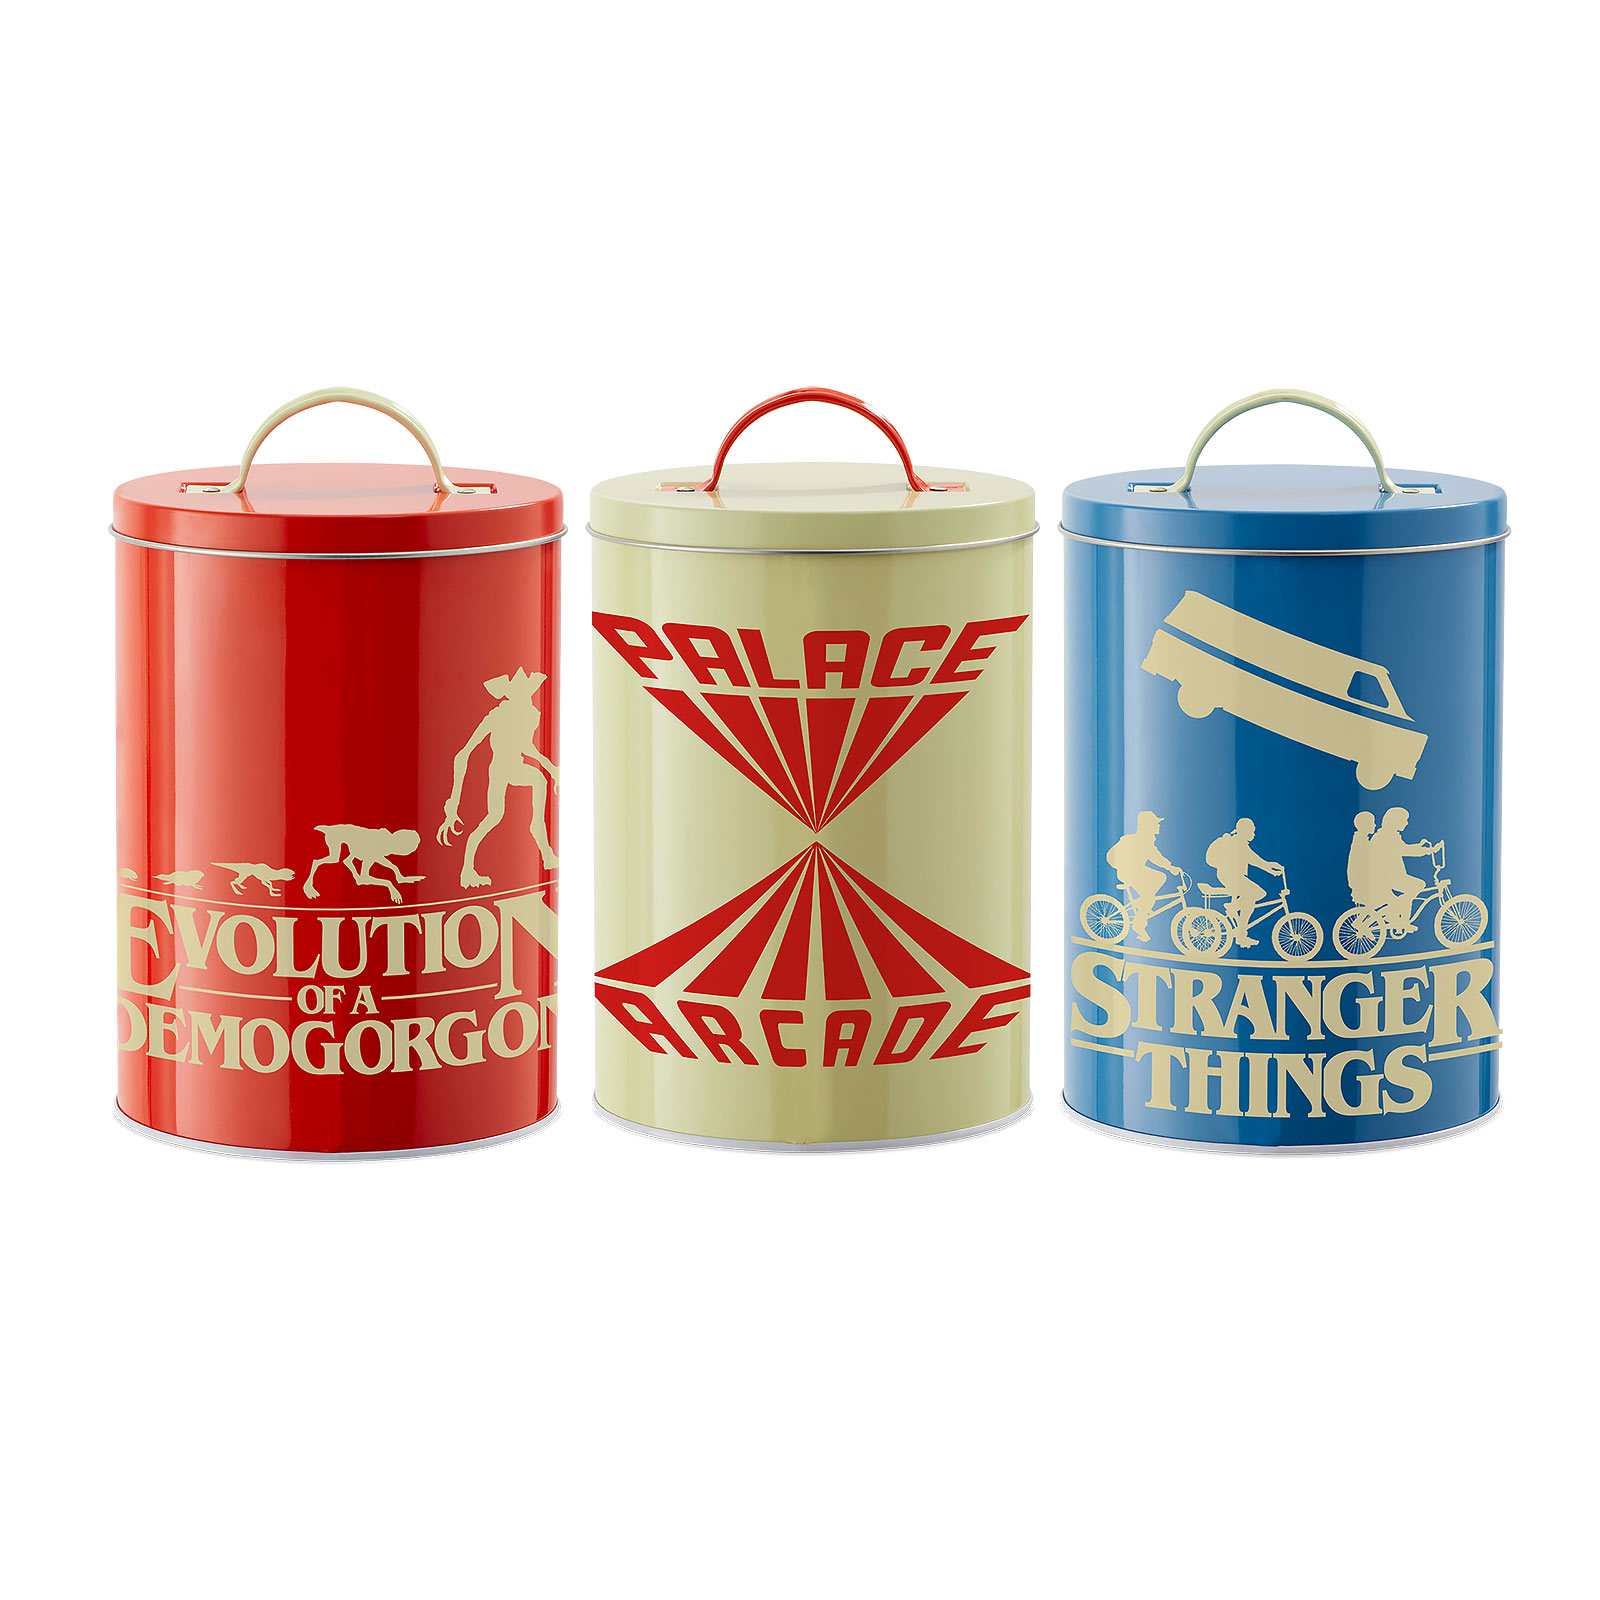 Stranger Things - Silhouette Cans 3-piece set